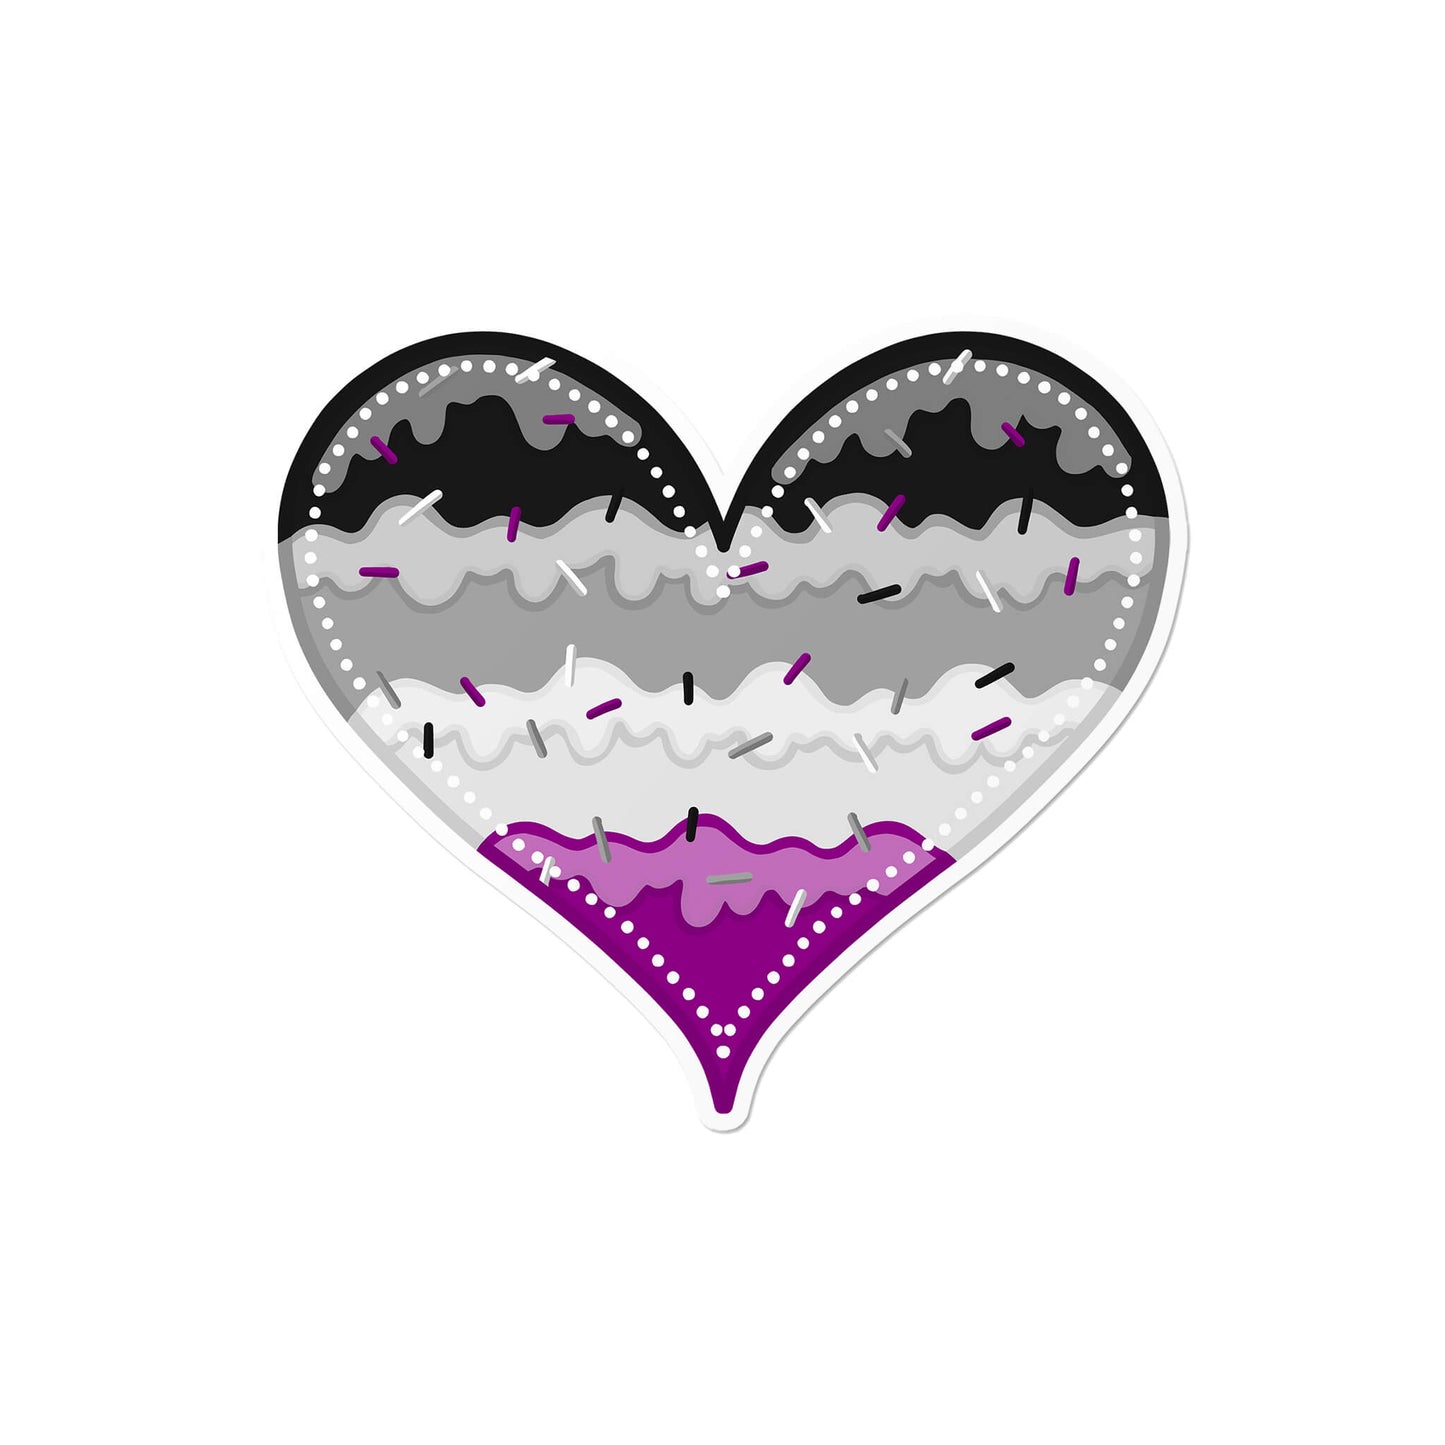 Asexual Heart Sticker